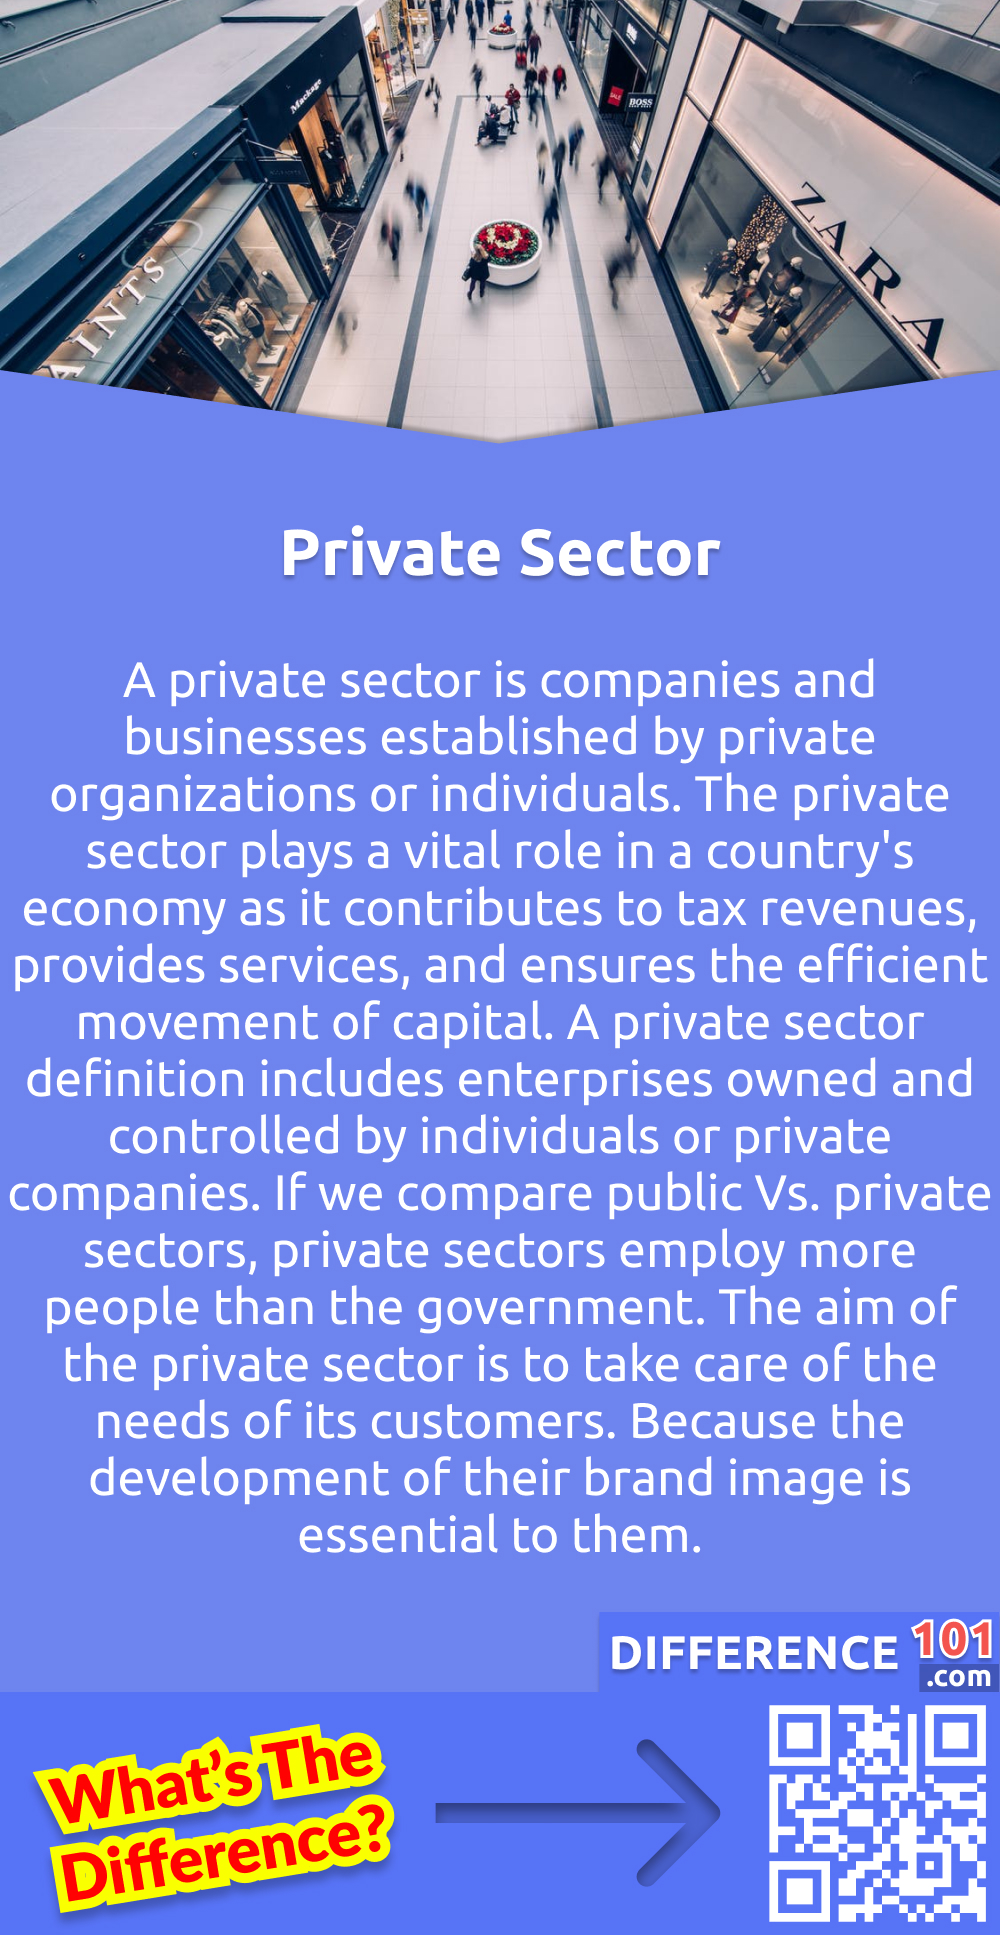 What is the Private Sector? A private sector is companies and businesses established by private organizations or individuals. The private sector plays a vital role in a country's economy as it contributes to tax revenues, provides services, and ensures the efficient movement of capital. A private sector definition includes enterprises owned and controlled by individuals or private companies. If we compare public Vs. private sectors, private sectors employ more people than the government. The aim of the private sector is to take care of the needs of its customers. Because the development of their brand image is essential to them.